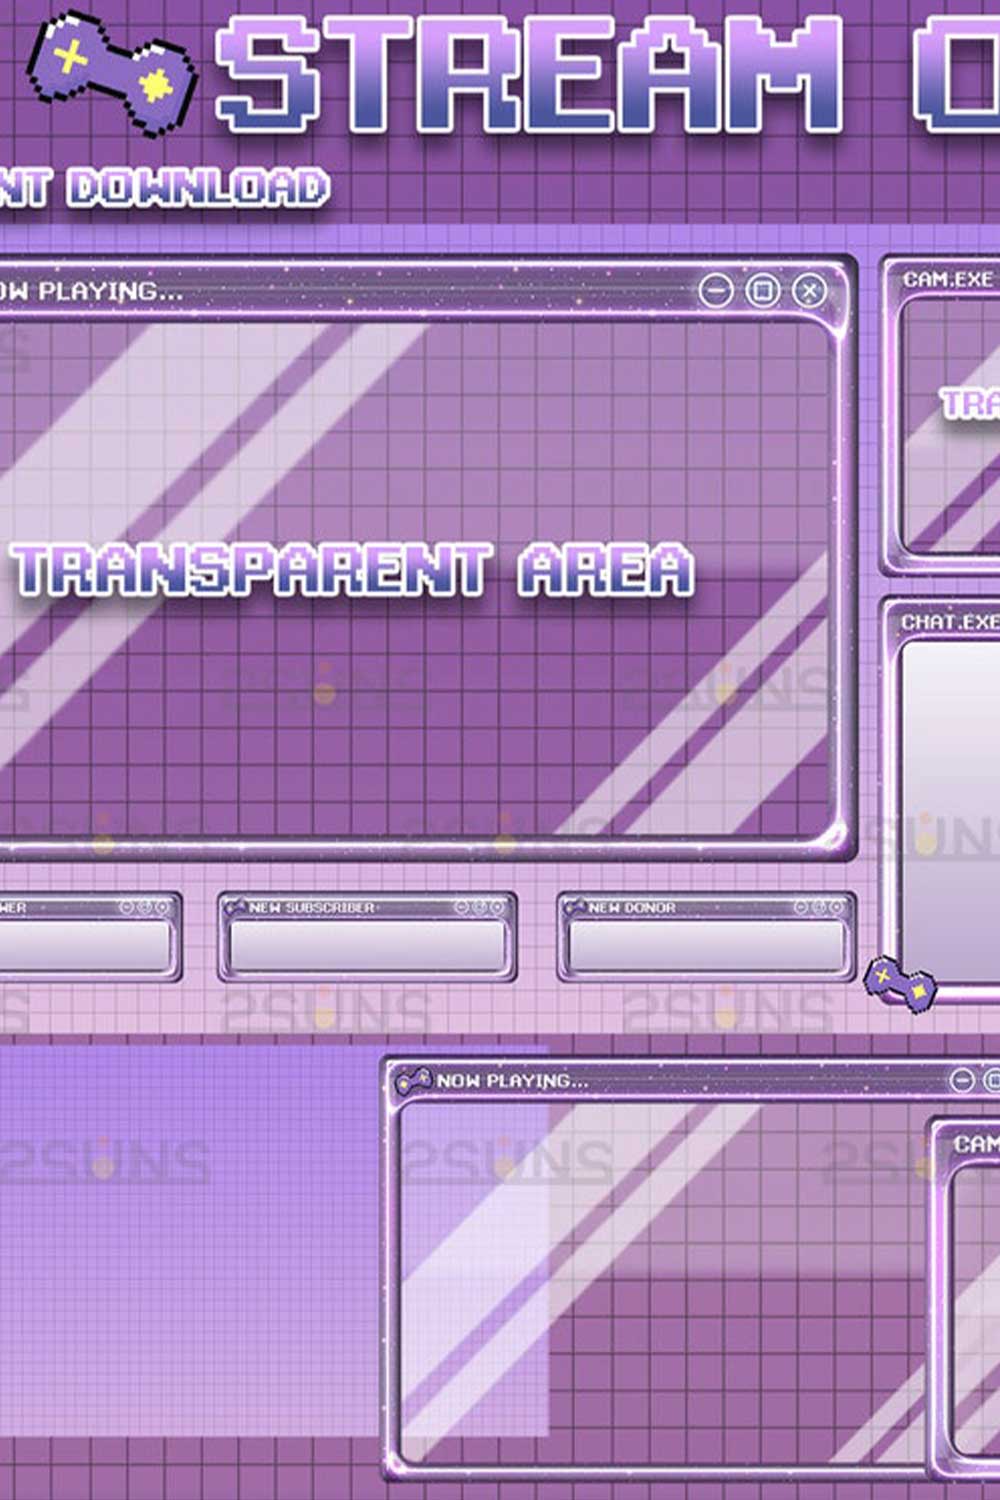 Stream Kawaii Twitch Panels Overlay Package Pinterest Image.